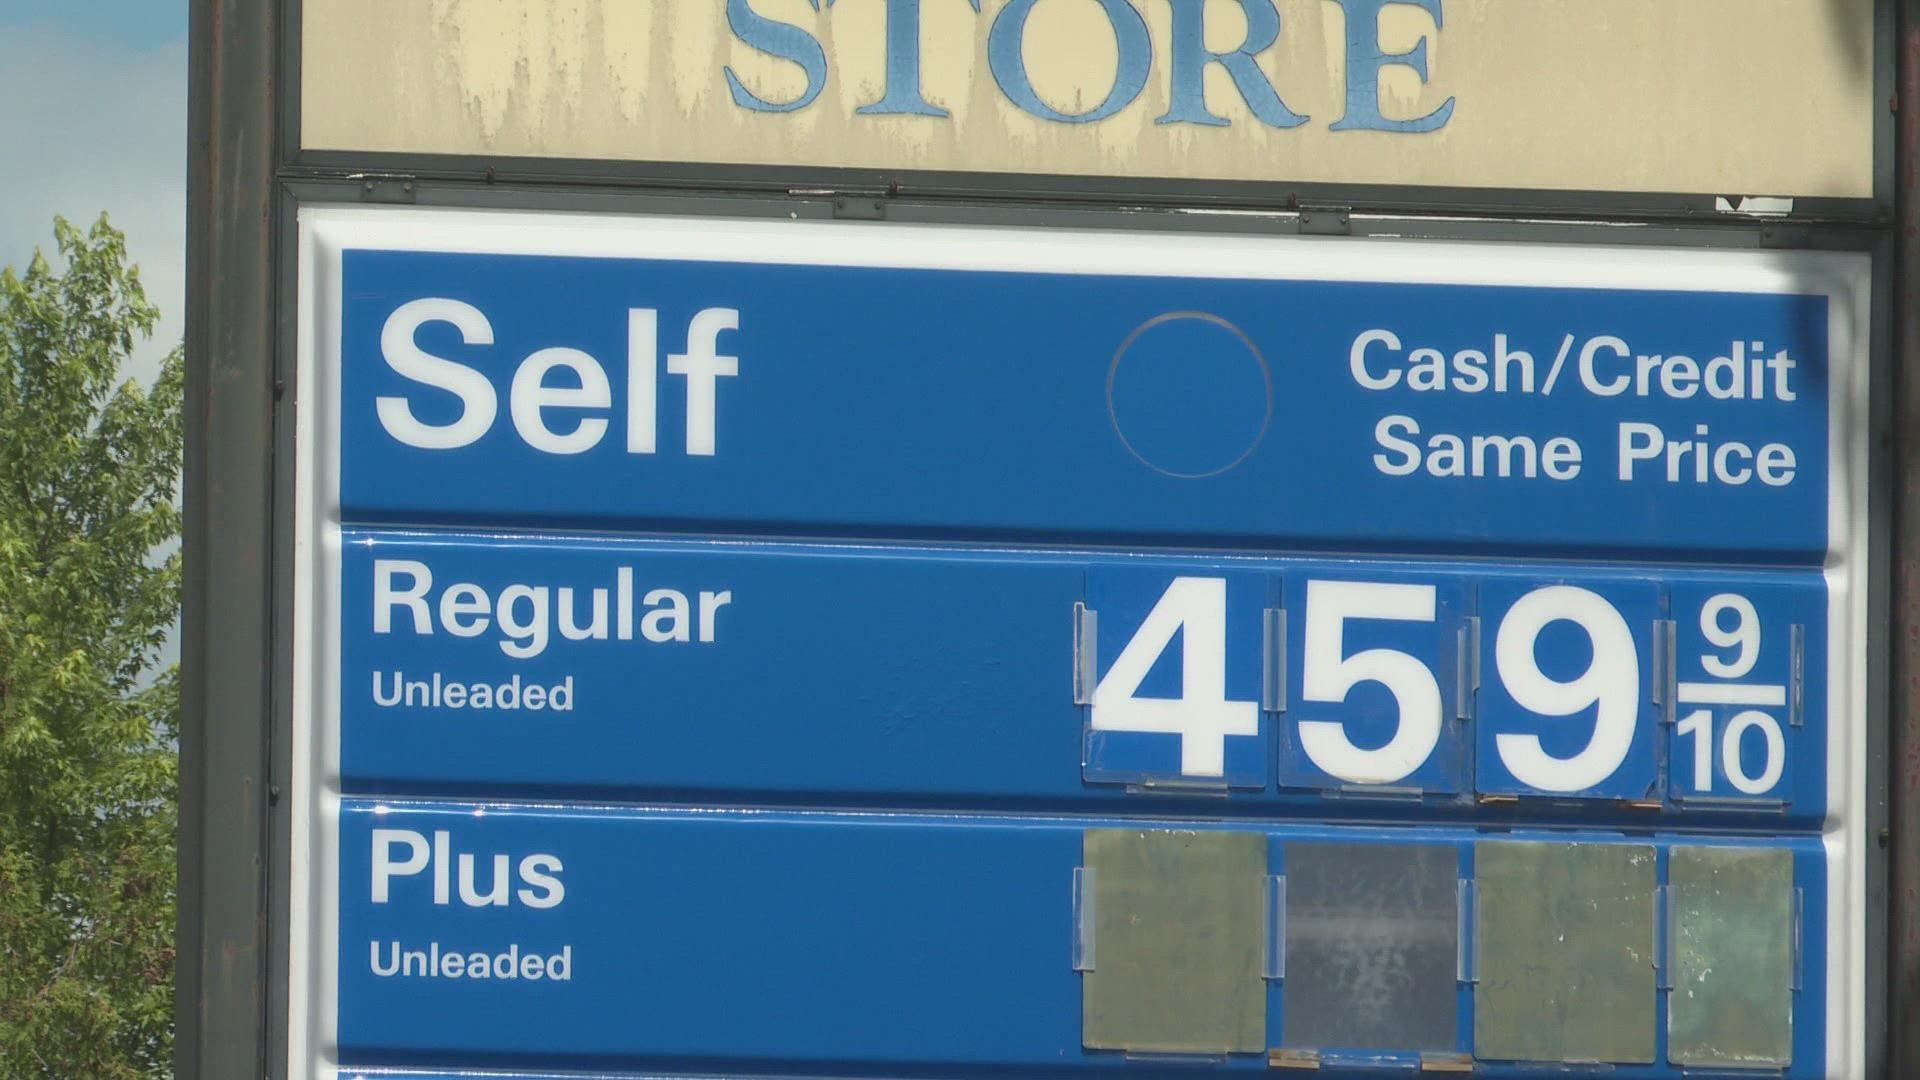 One gas station in Hudson, Maine claims to have the lowest regular gas prices in Penobscot County.